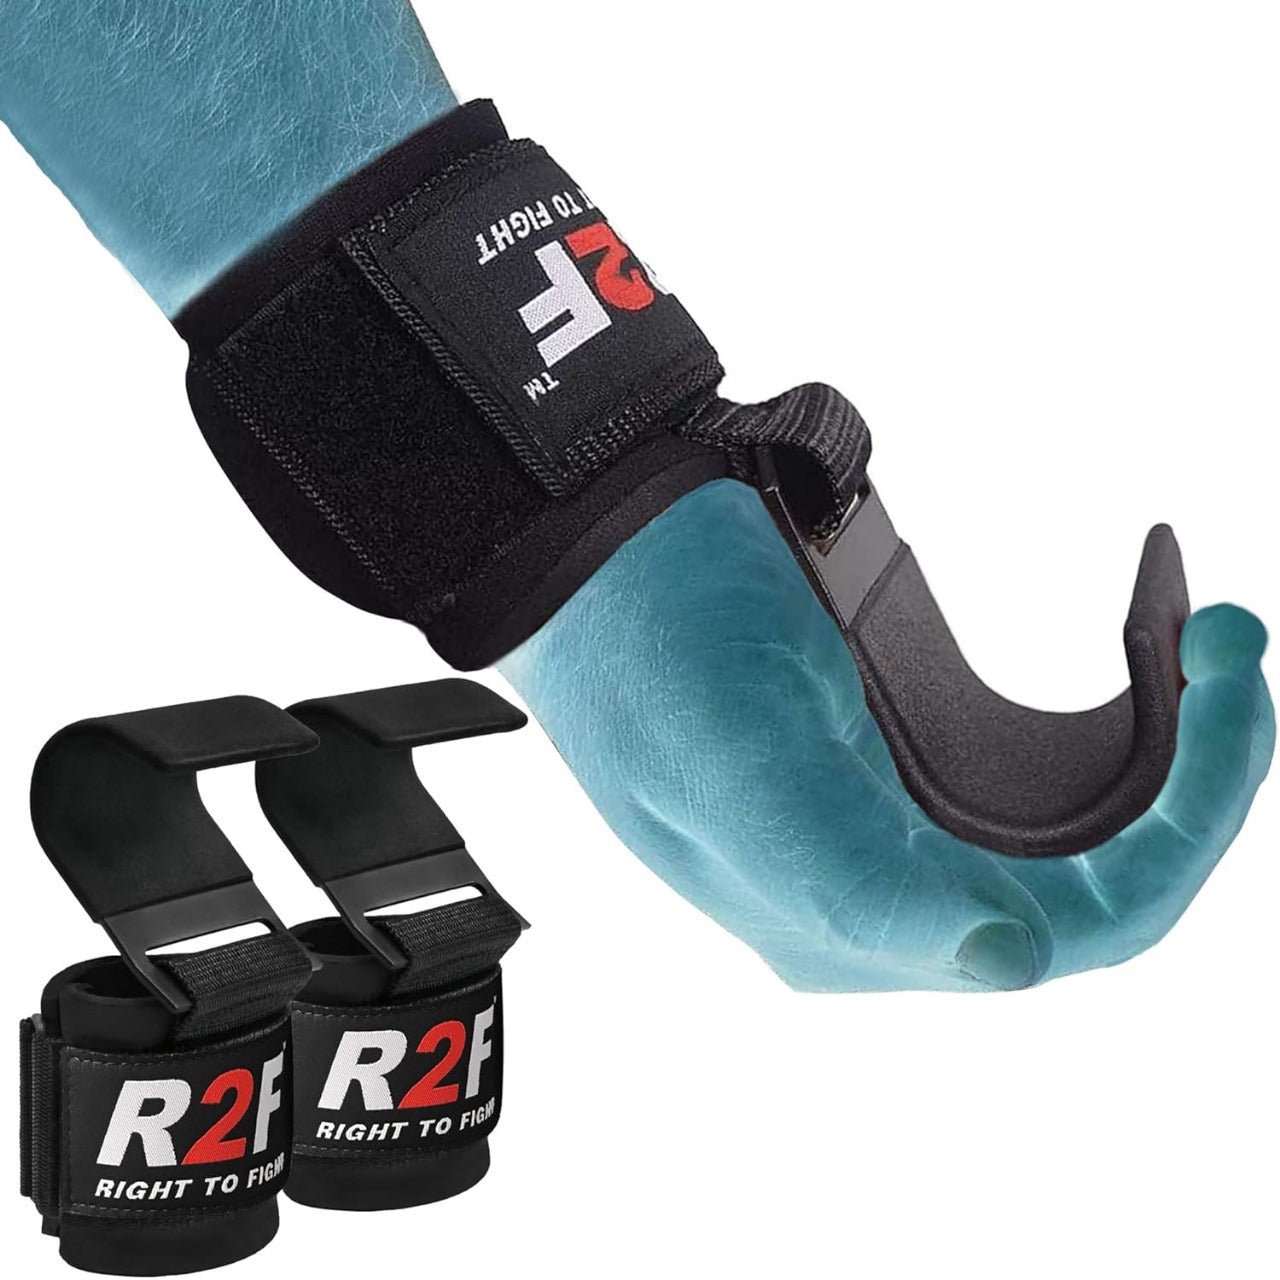 Weight Lifting Hook Straps Gym Wrist Support Grips